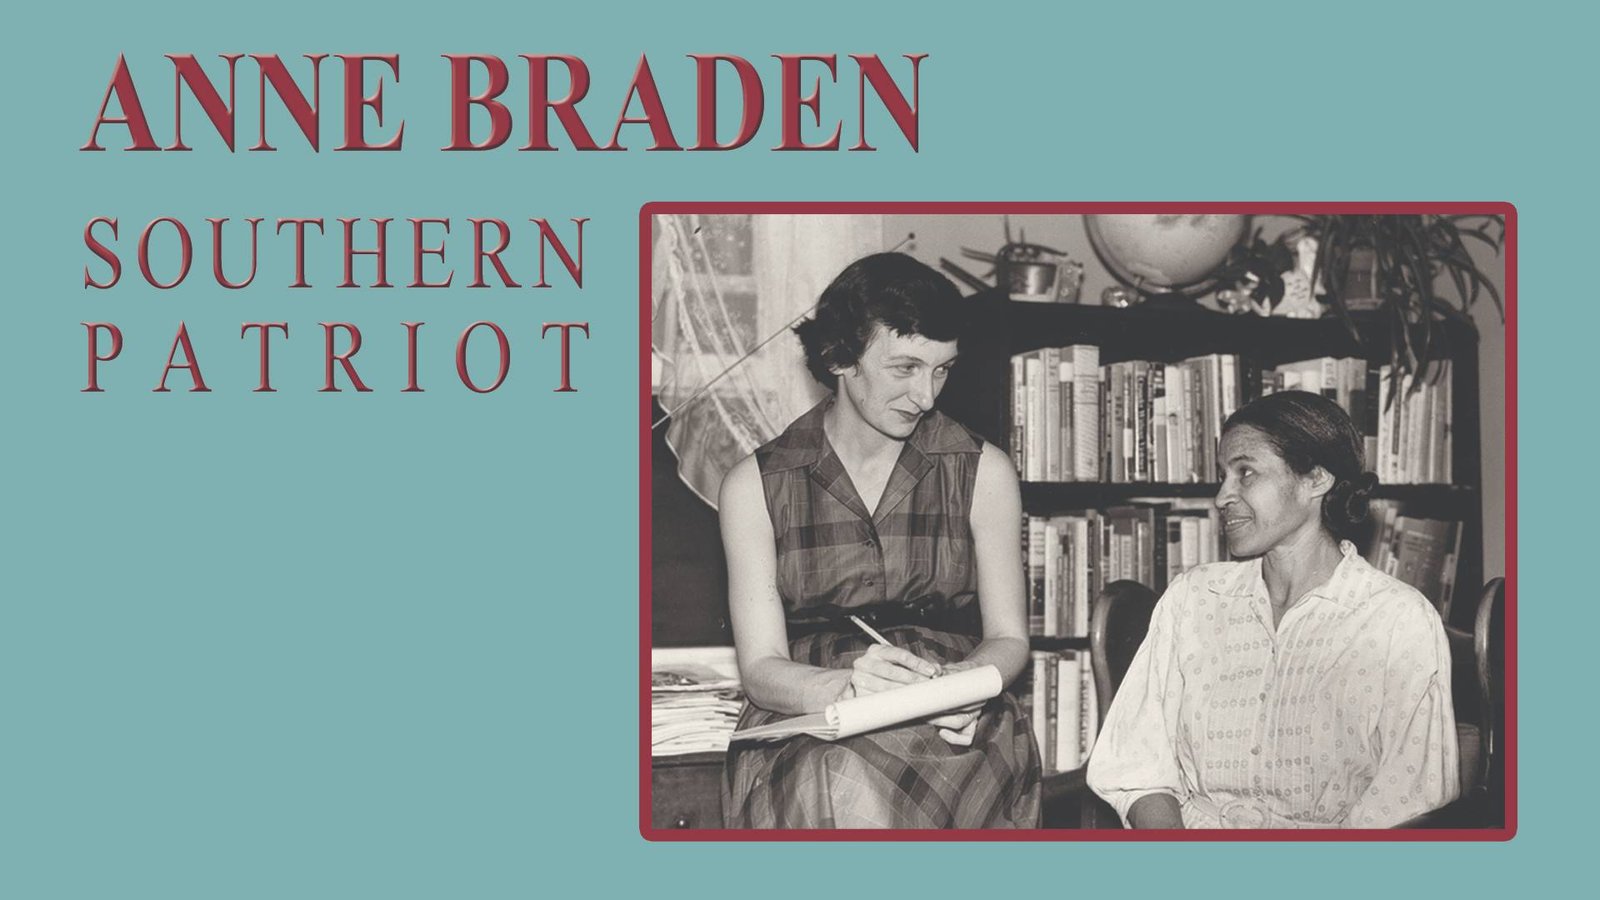 Anne Braden: Southern Patriot - The Story of a Civil Rights Activist